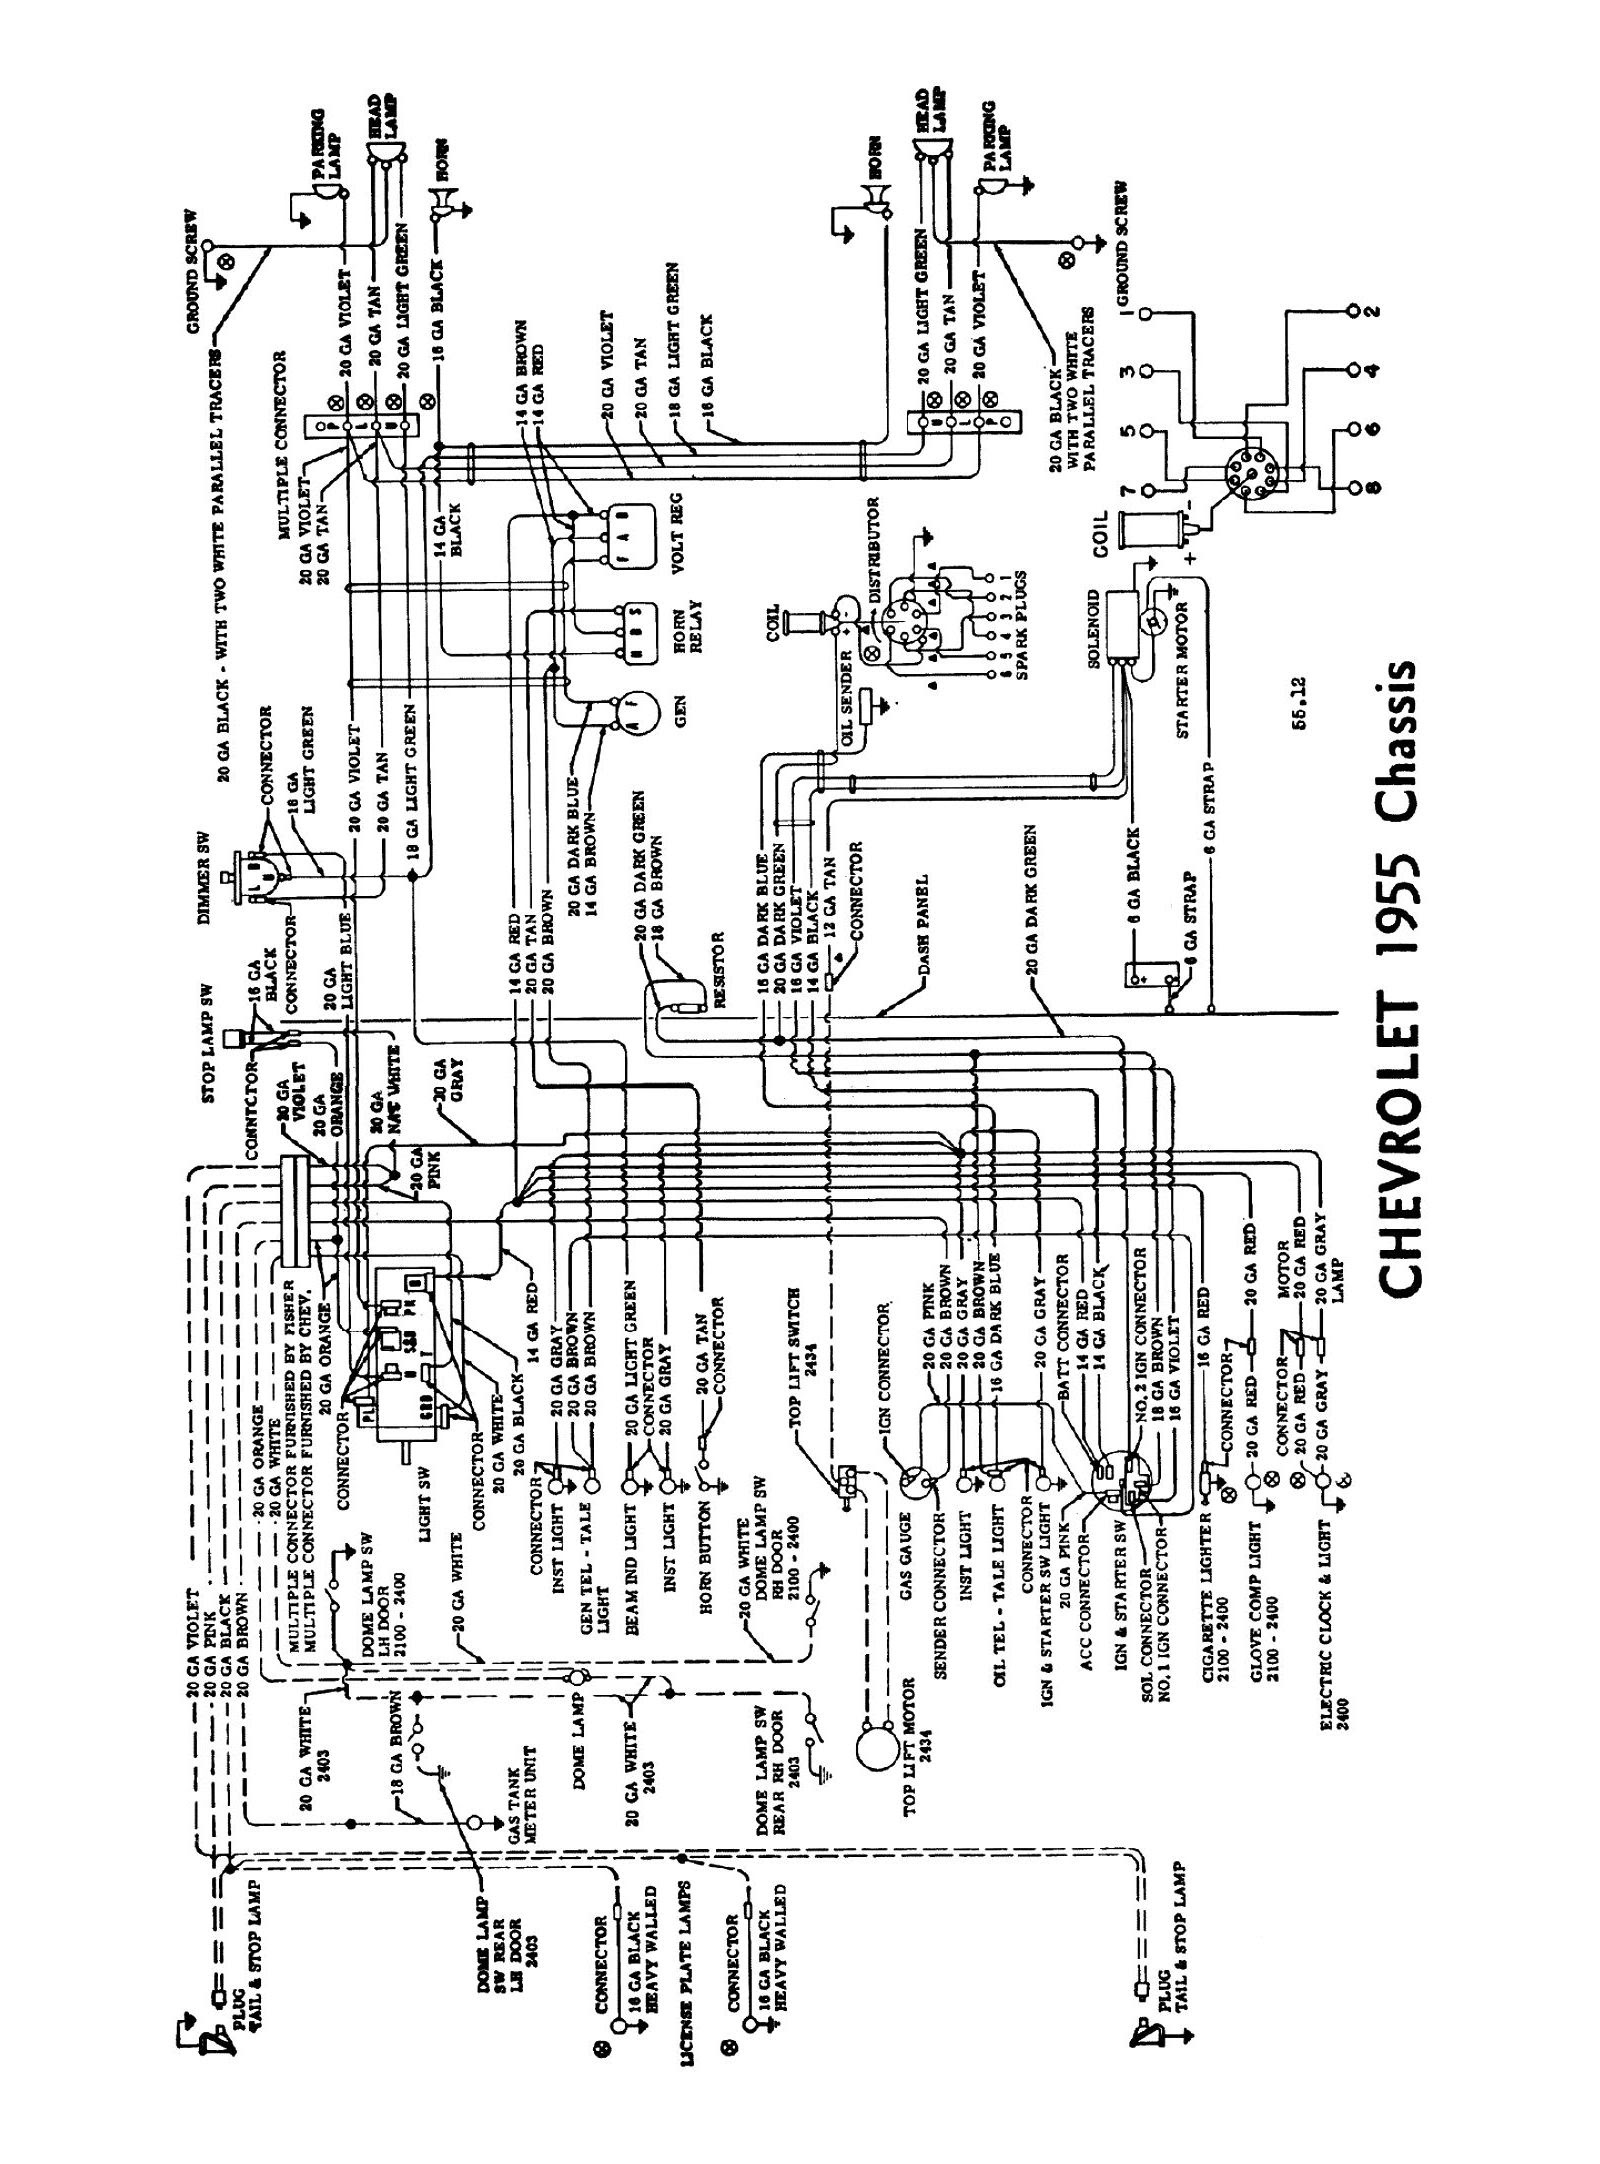 20 New 1955 Chevy Ignition Switch Wiring Diagram